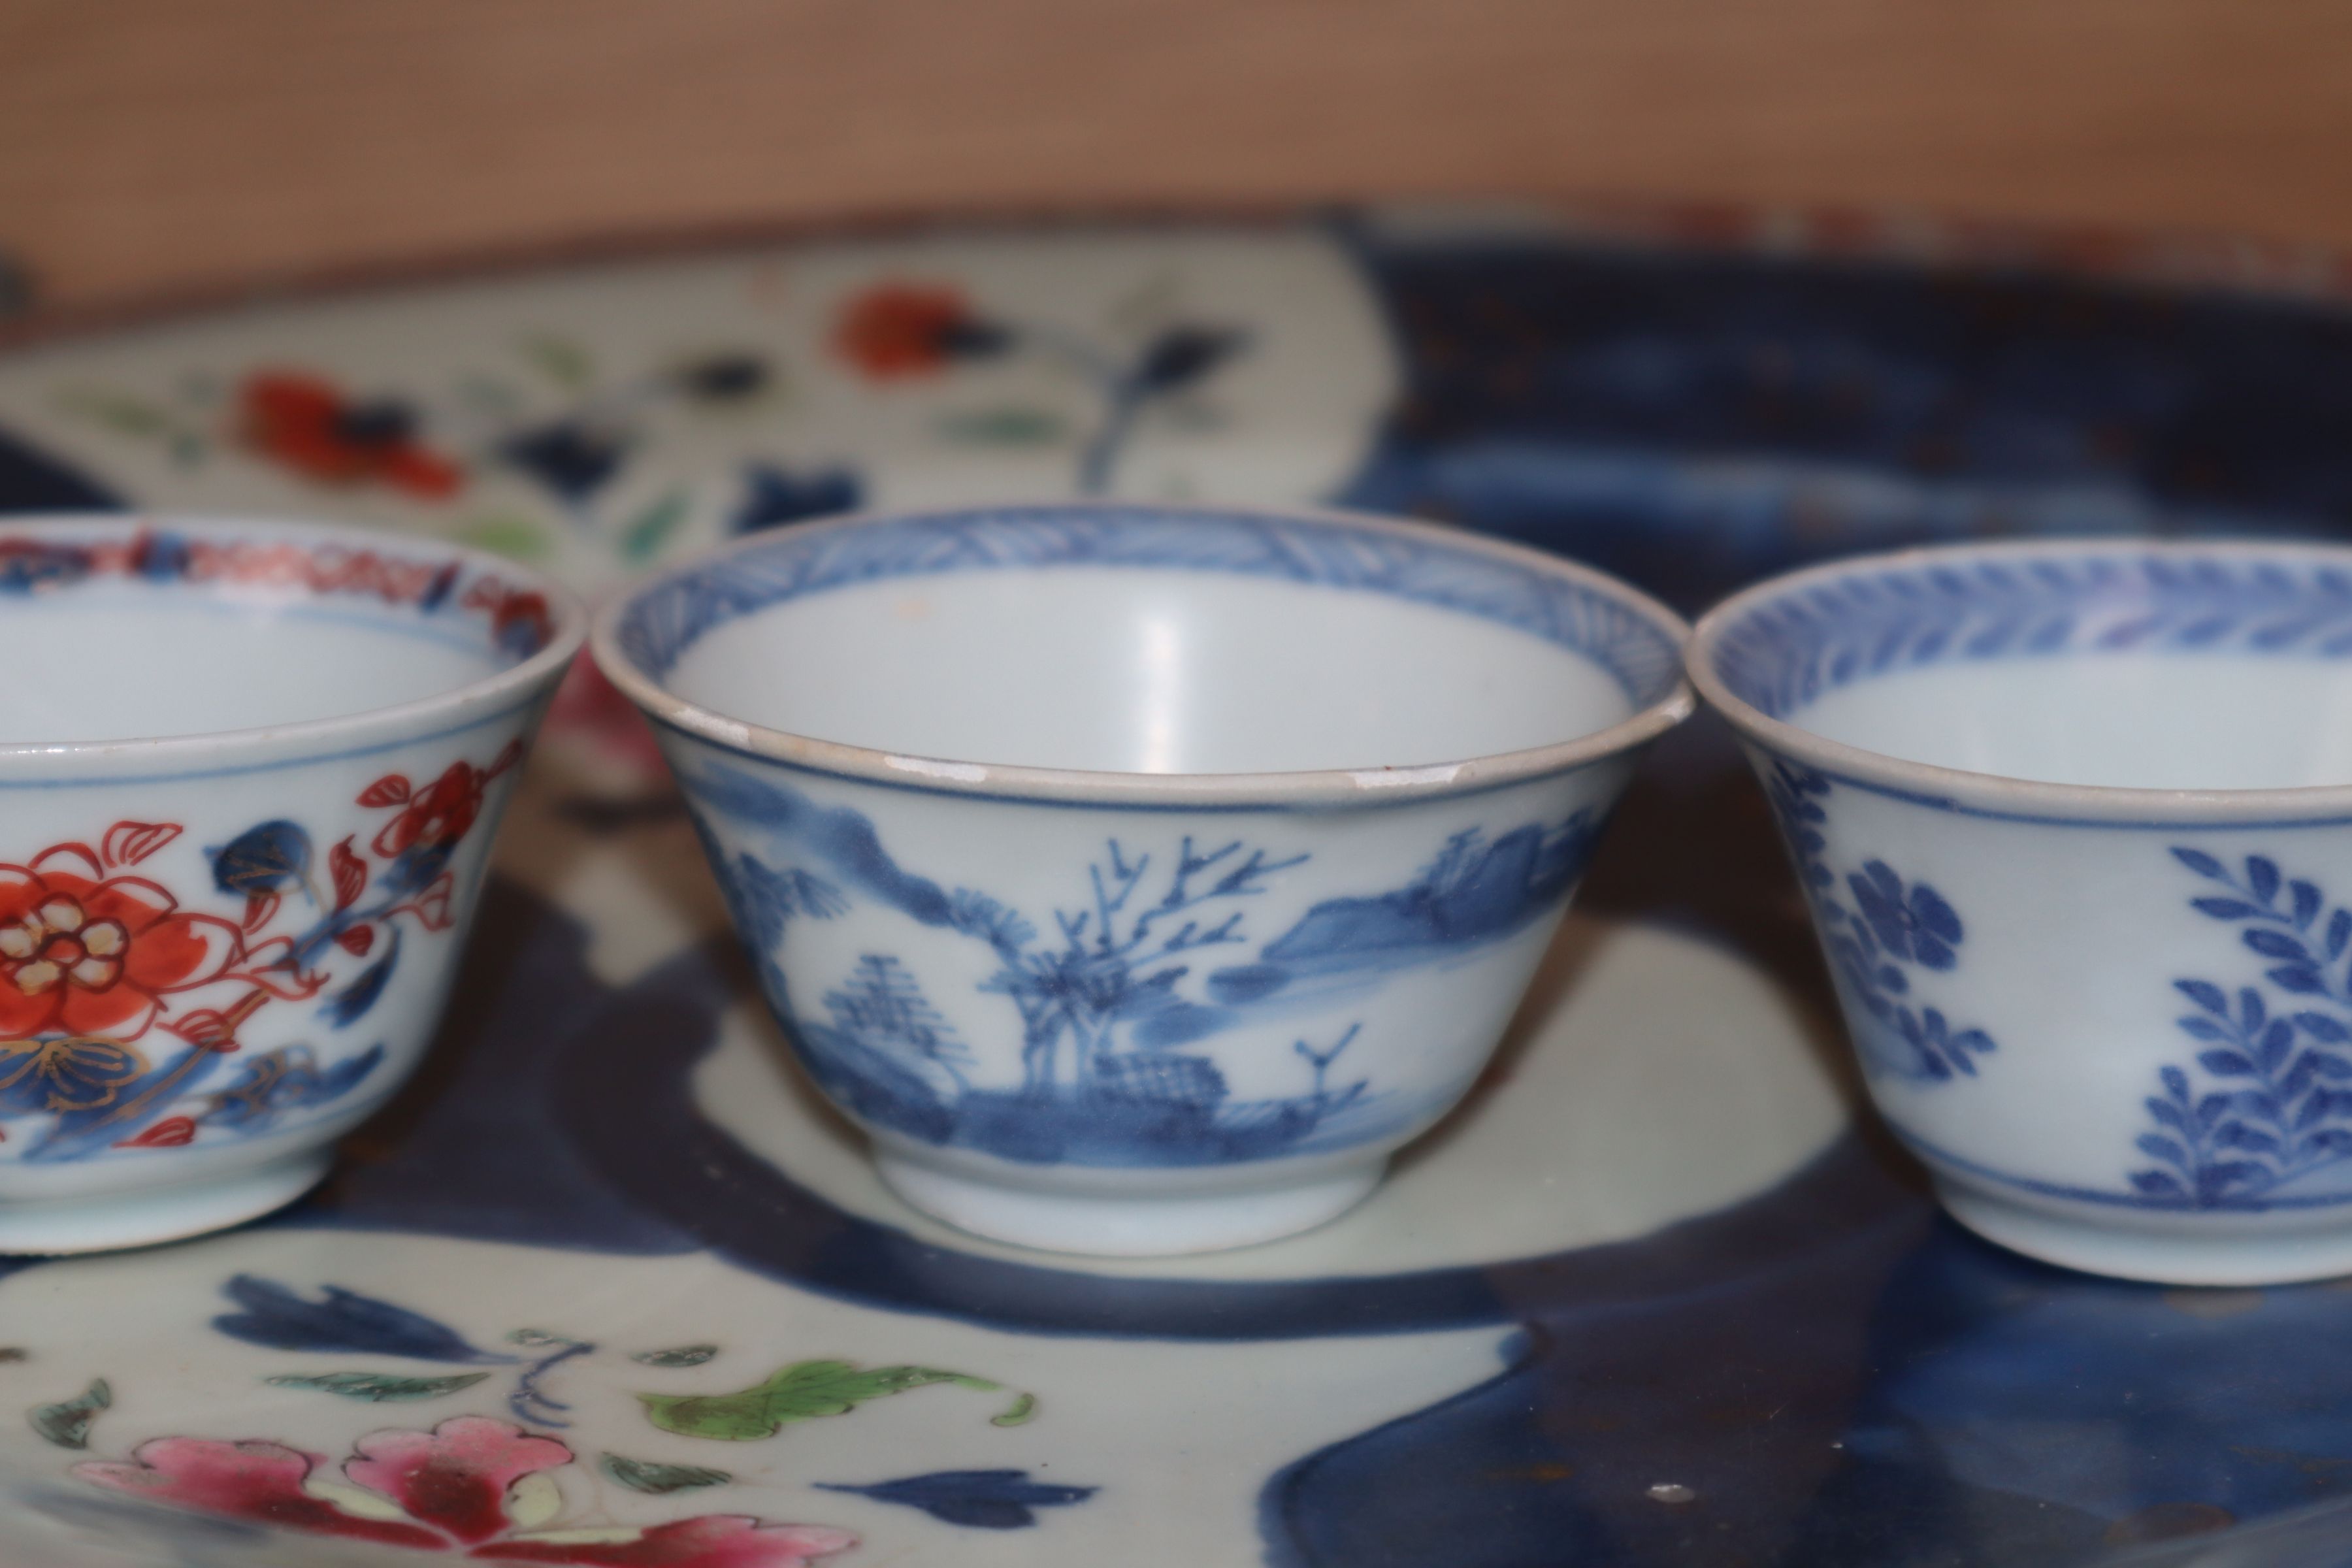 A group of 18th century Chinese export dishes, cup and tea bowls - Image 6 of 8